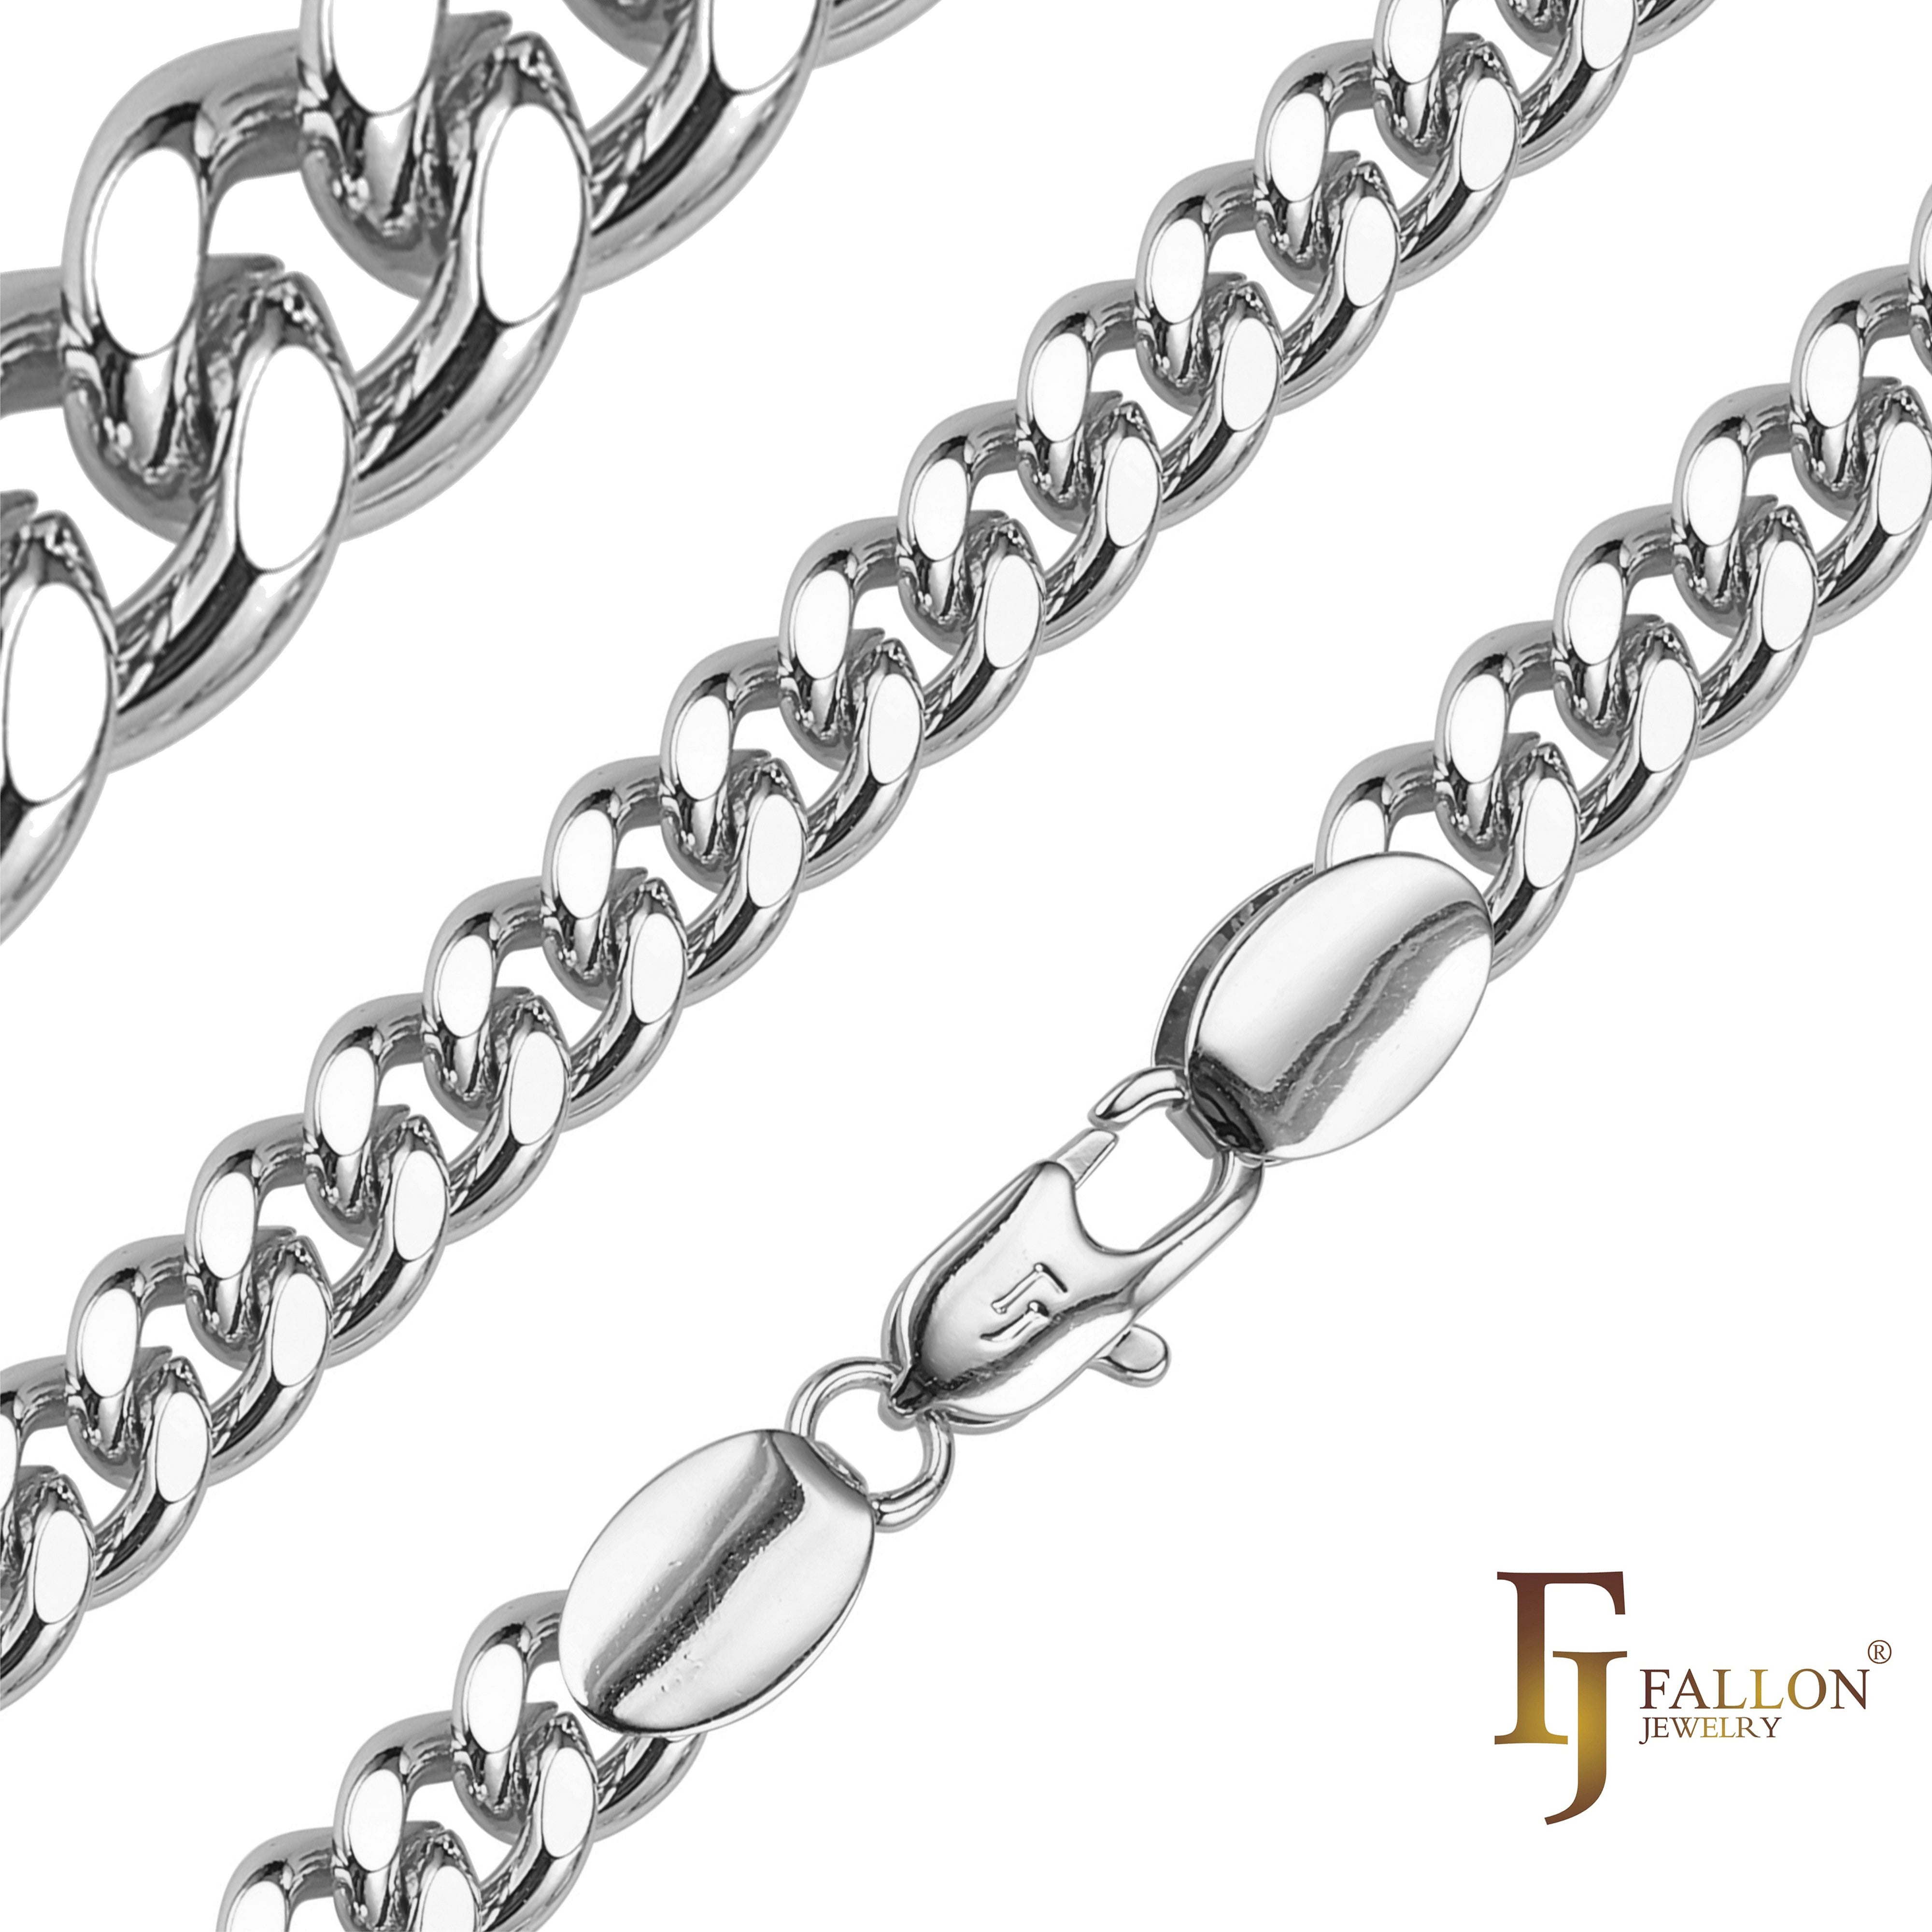 .Classic Miami Style Cuban link chains plated in White Gold, 14K Gold, two tone SF